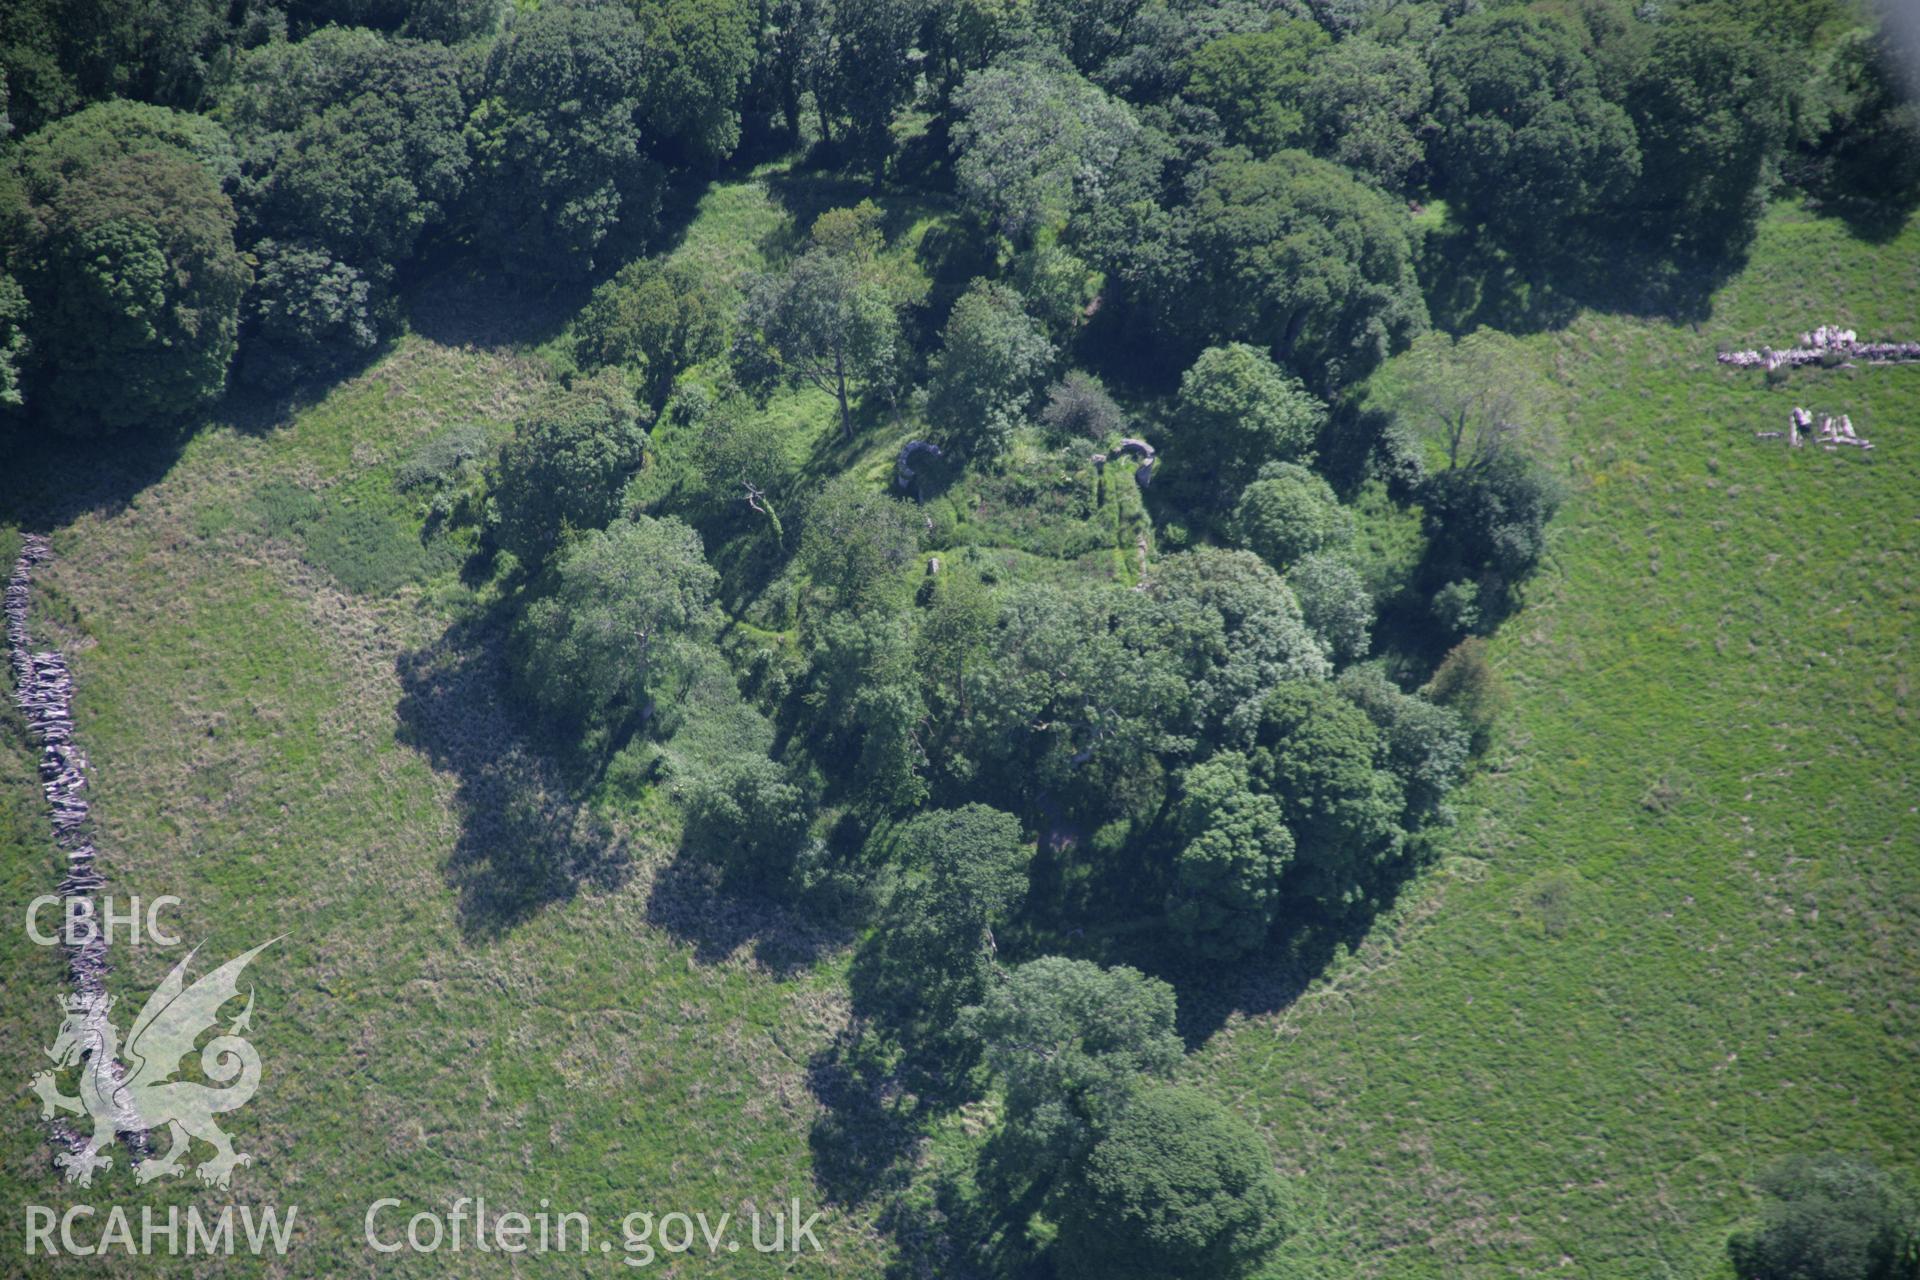 RCAHMW colour oblique aerial photograph of the castle earthworks and civil war fort at Castell Aberlleiniog, from the north. Taken on 14 June 2006 by Toby Driver.